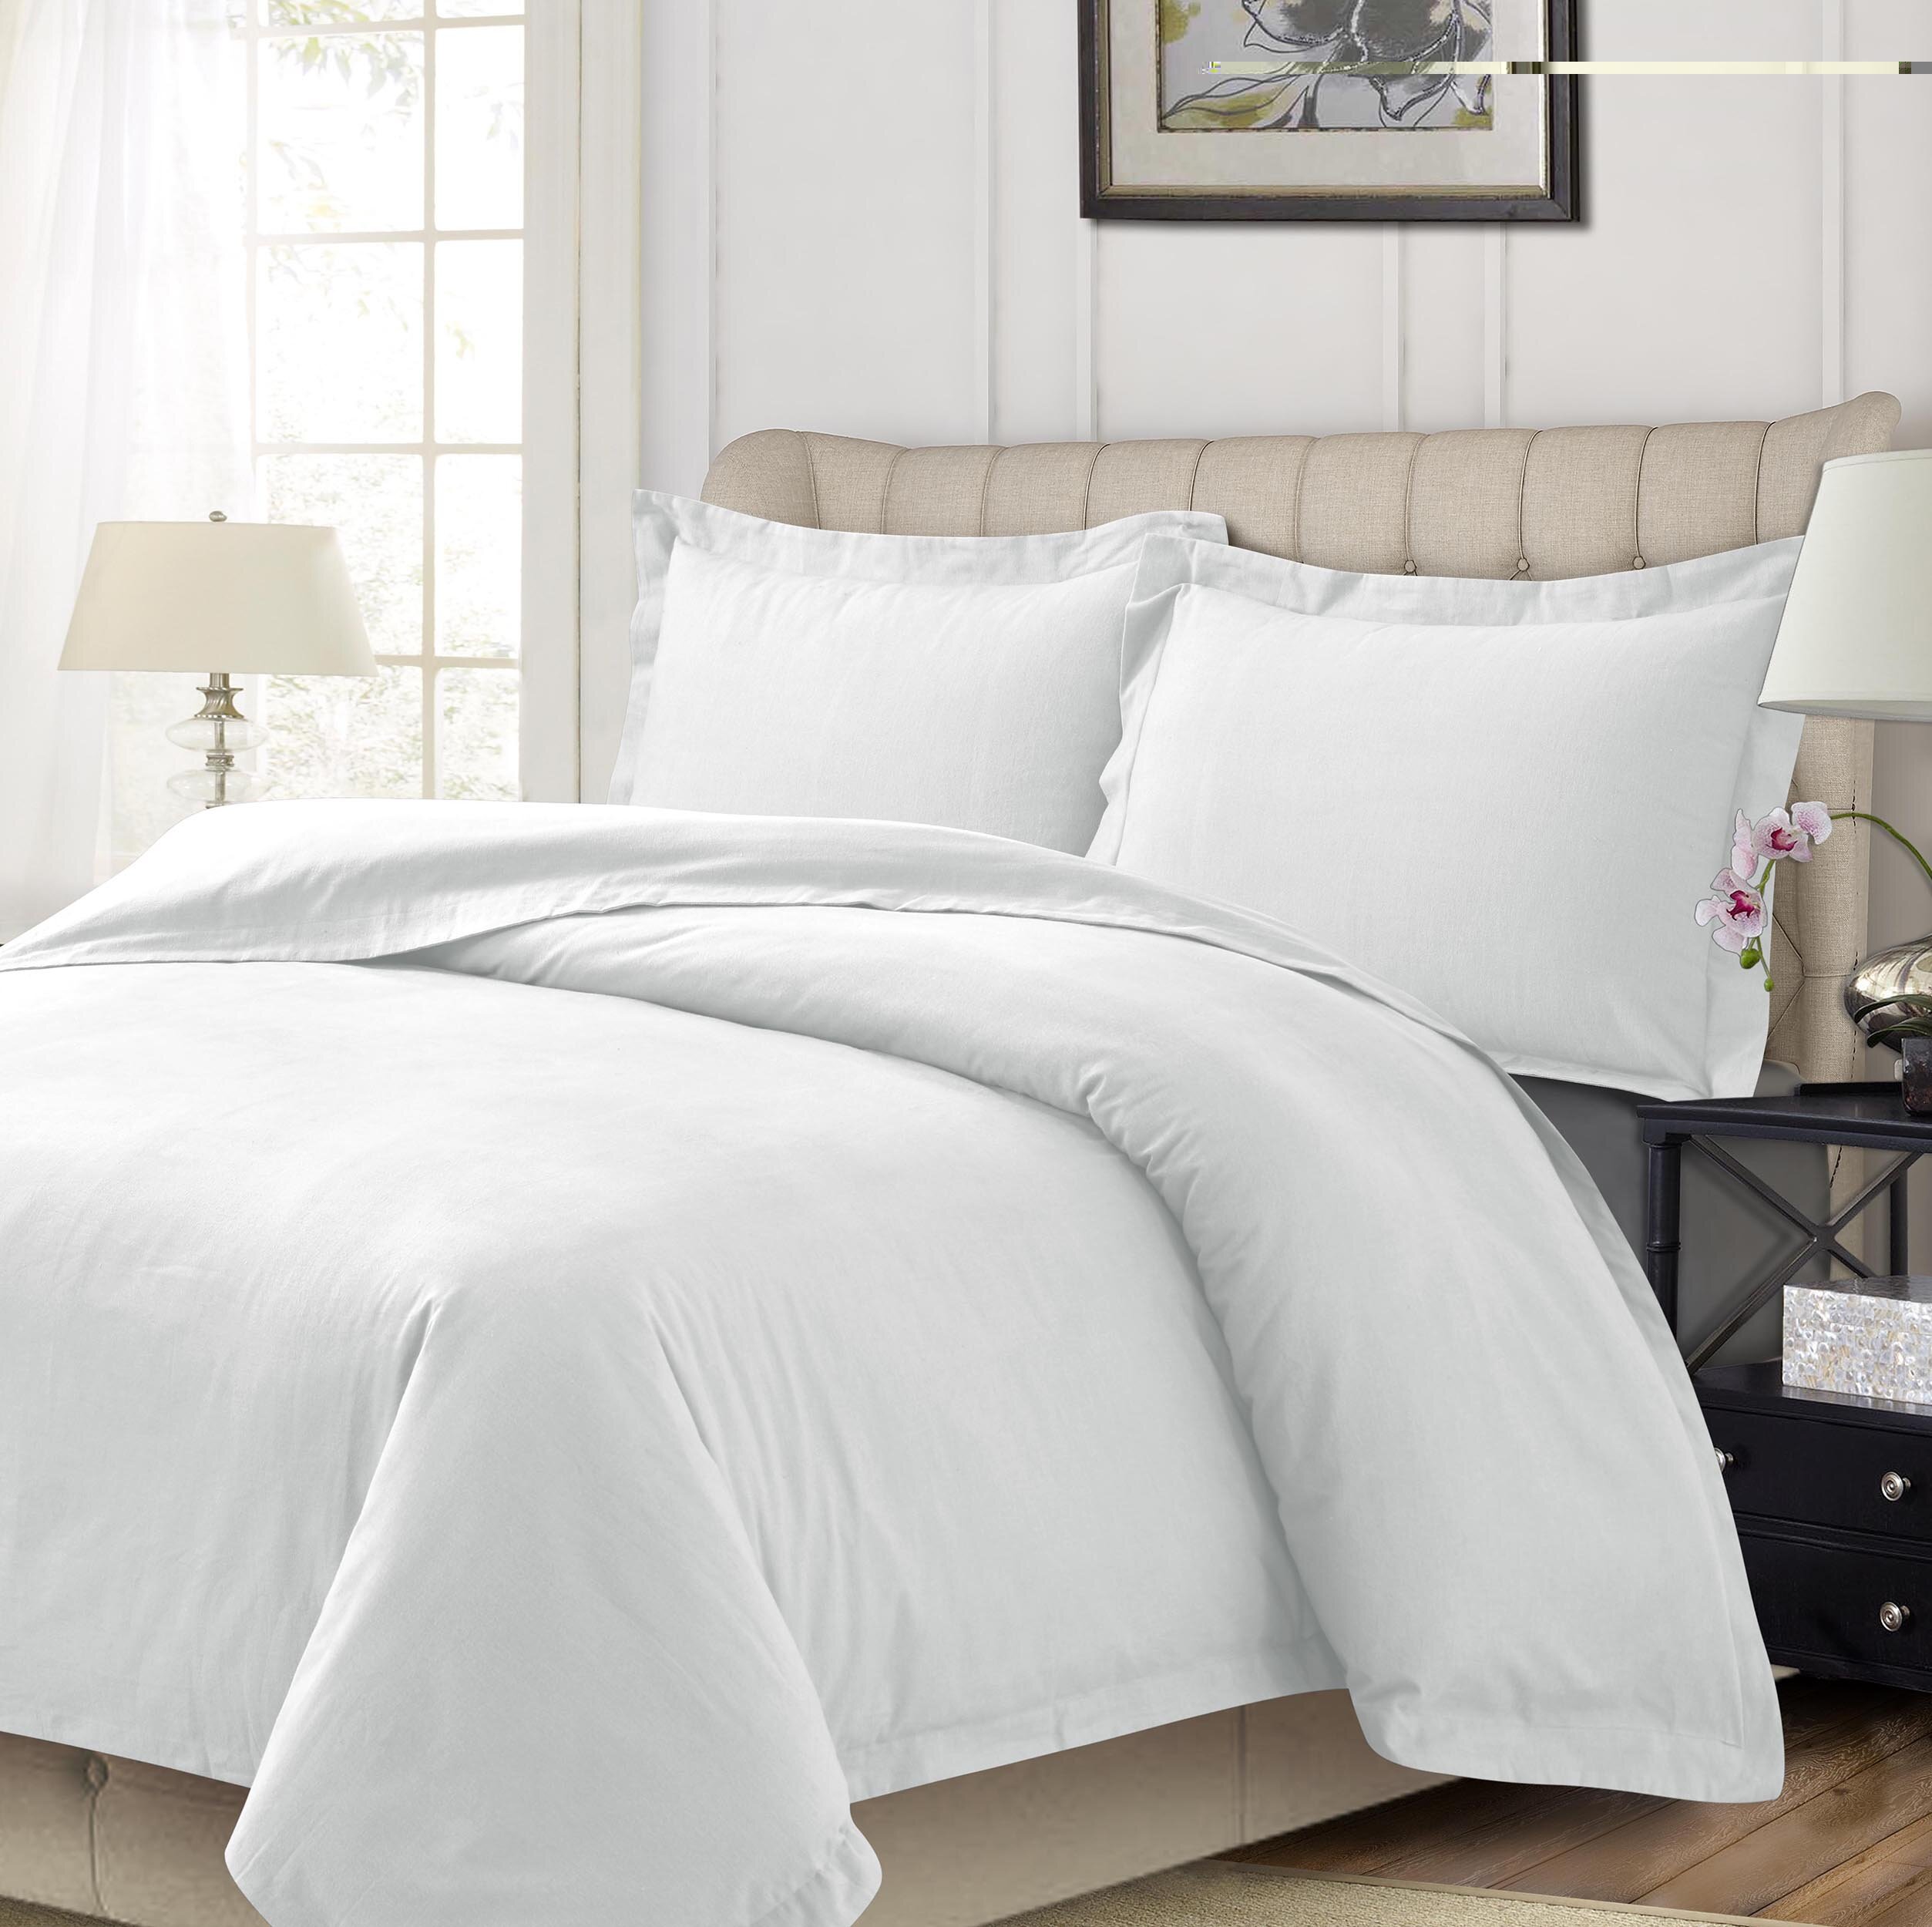 Laura Stag 100 Brushed Cotton Flannel Reversible Duvet Cover And